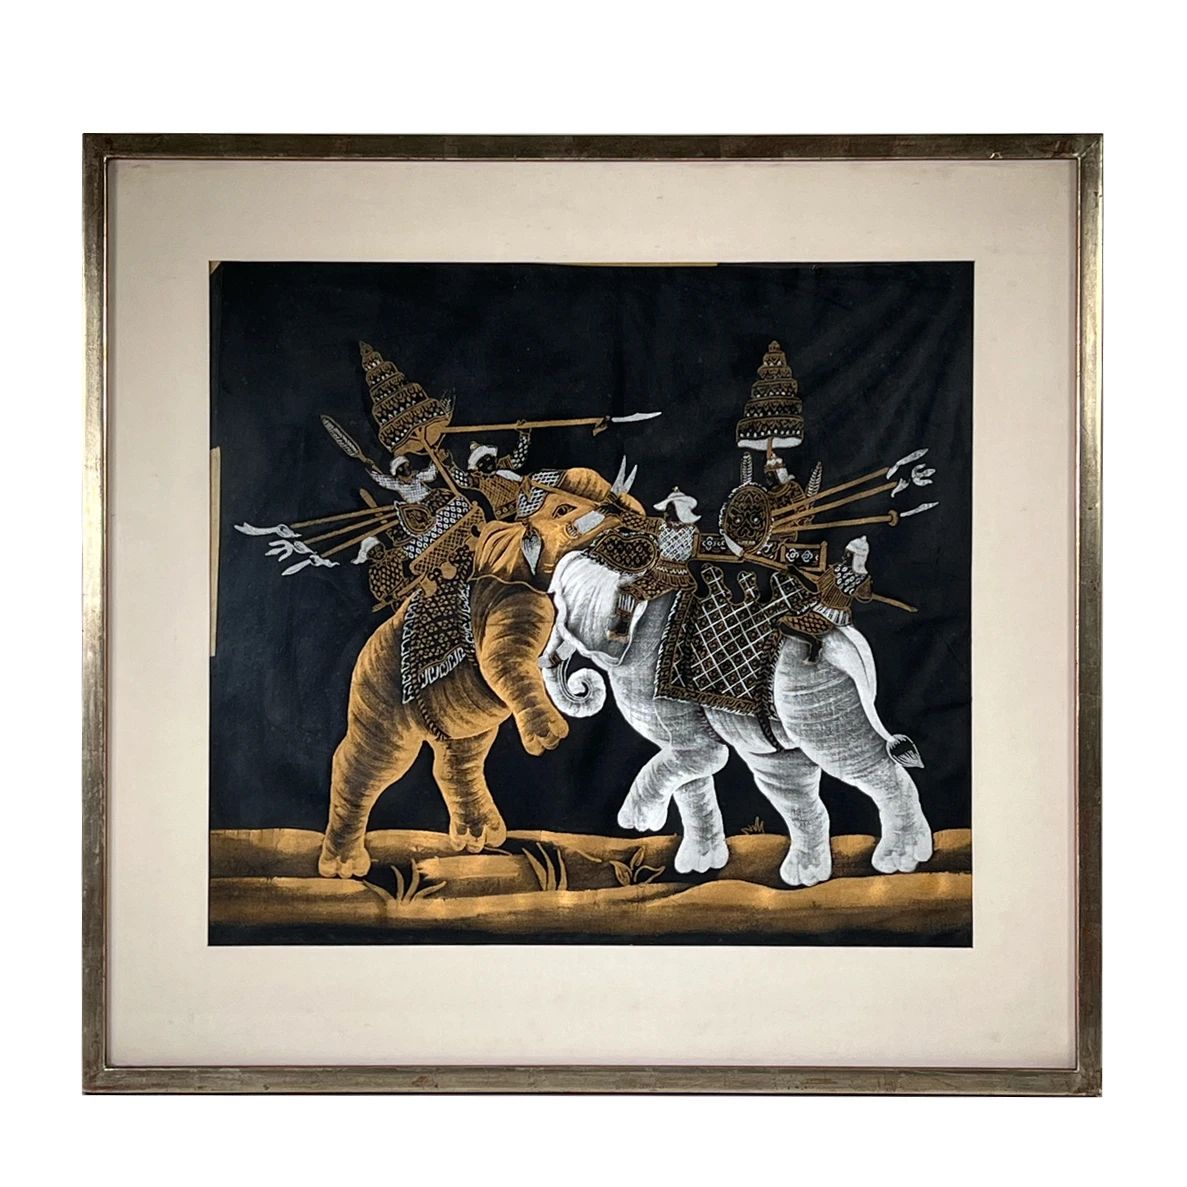 ELEPHANT WARFARE PAINTING ON SILK | Elephant Warfare. Oil paint on cloth. Depicts warriors with shields and spears mounted on clashing elephants. 17in x 19in sight. - l. 25.75 x h. 24.25 in